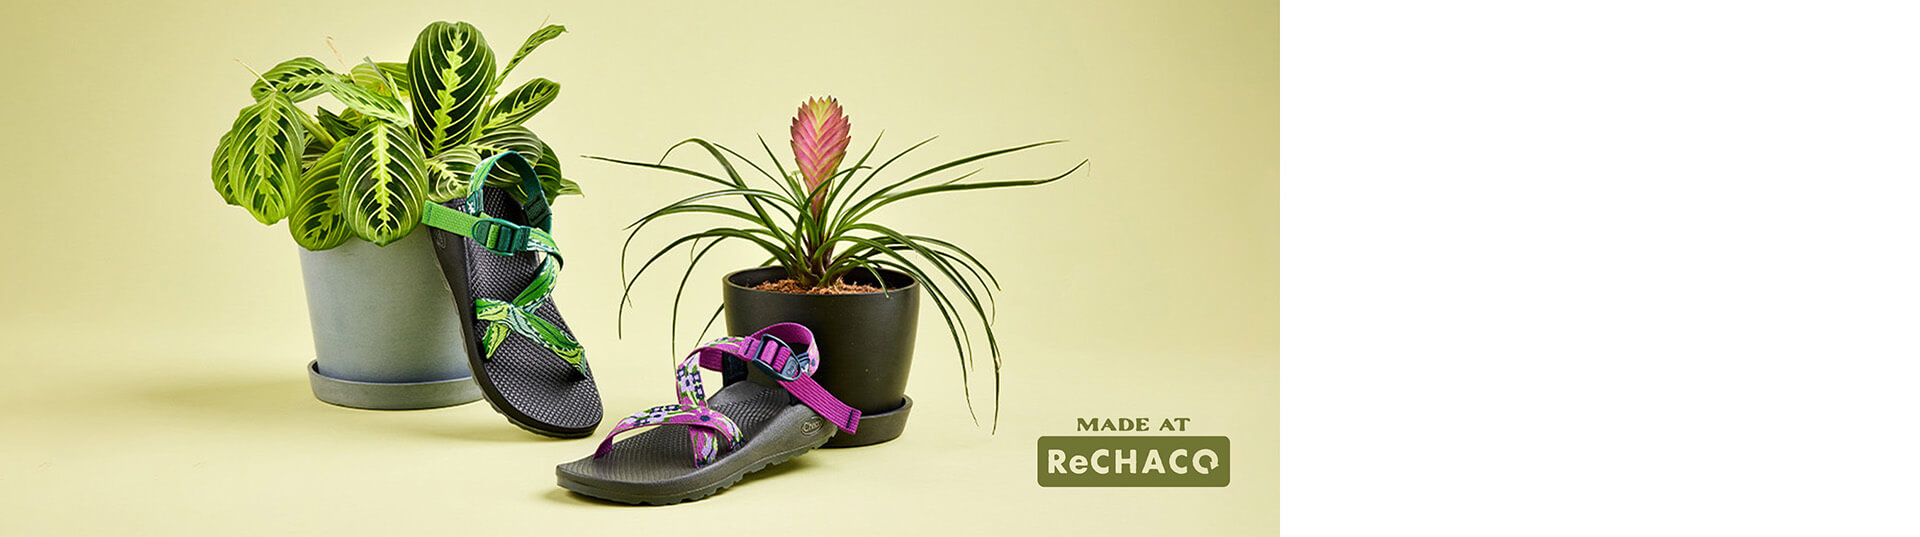 Two potted plants, with a Chaco sandal leaning against each, inspired by the plants. Made at re-chaco logo.